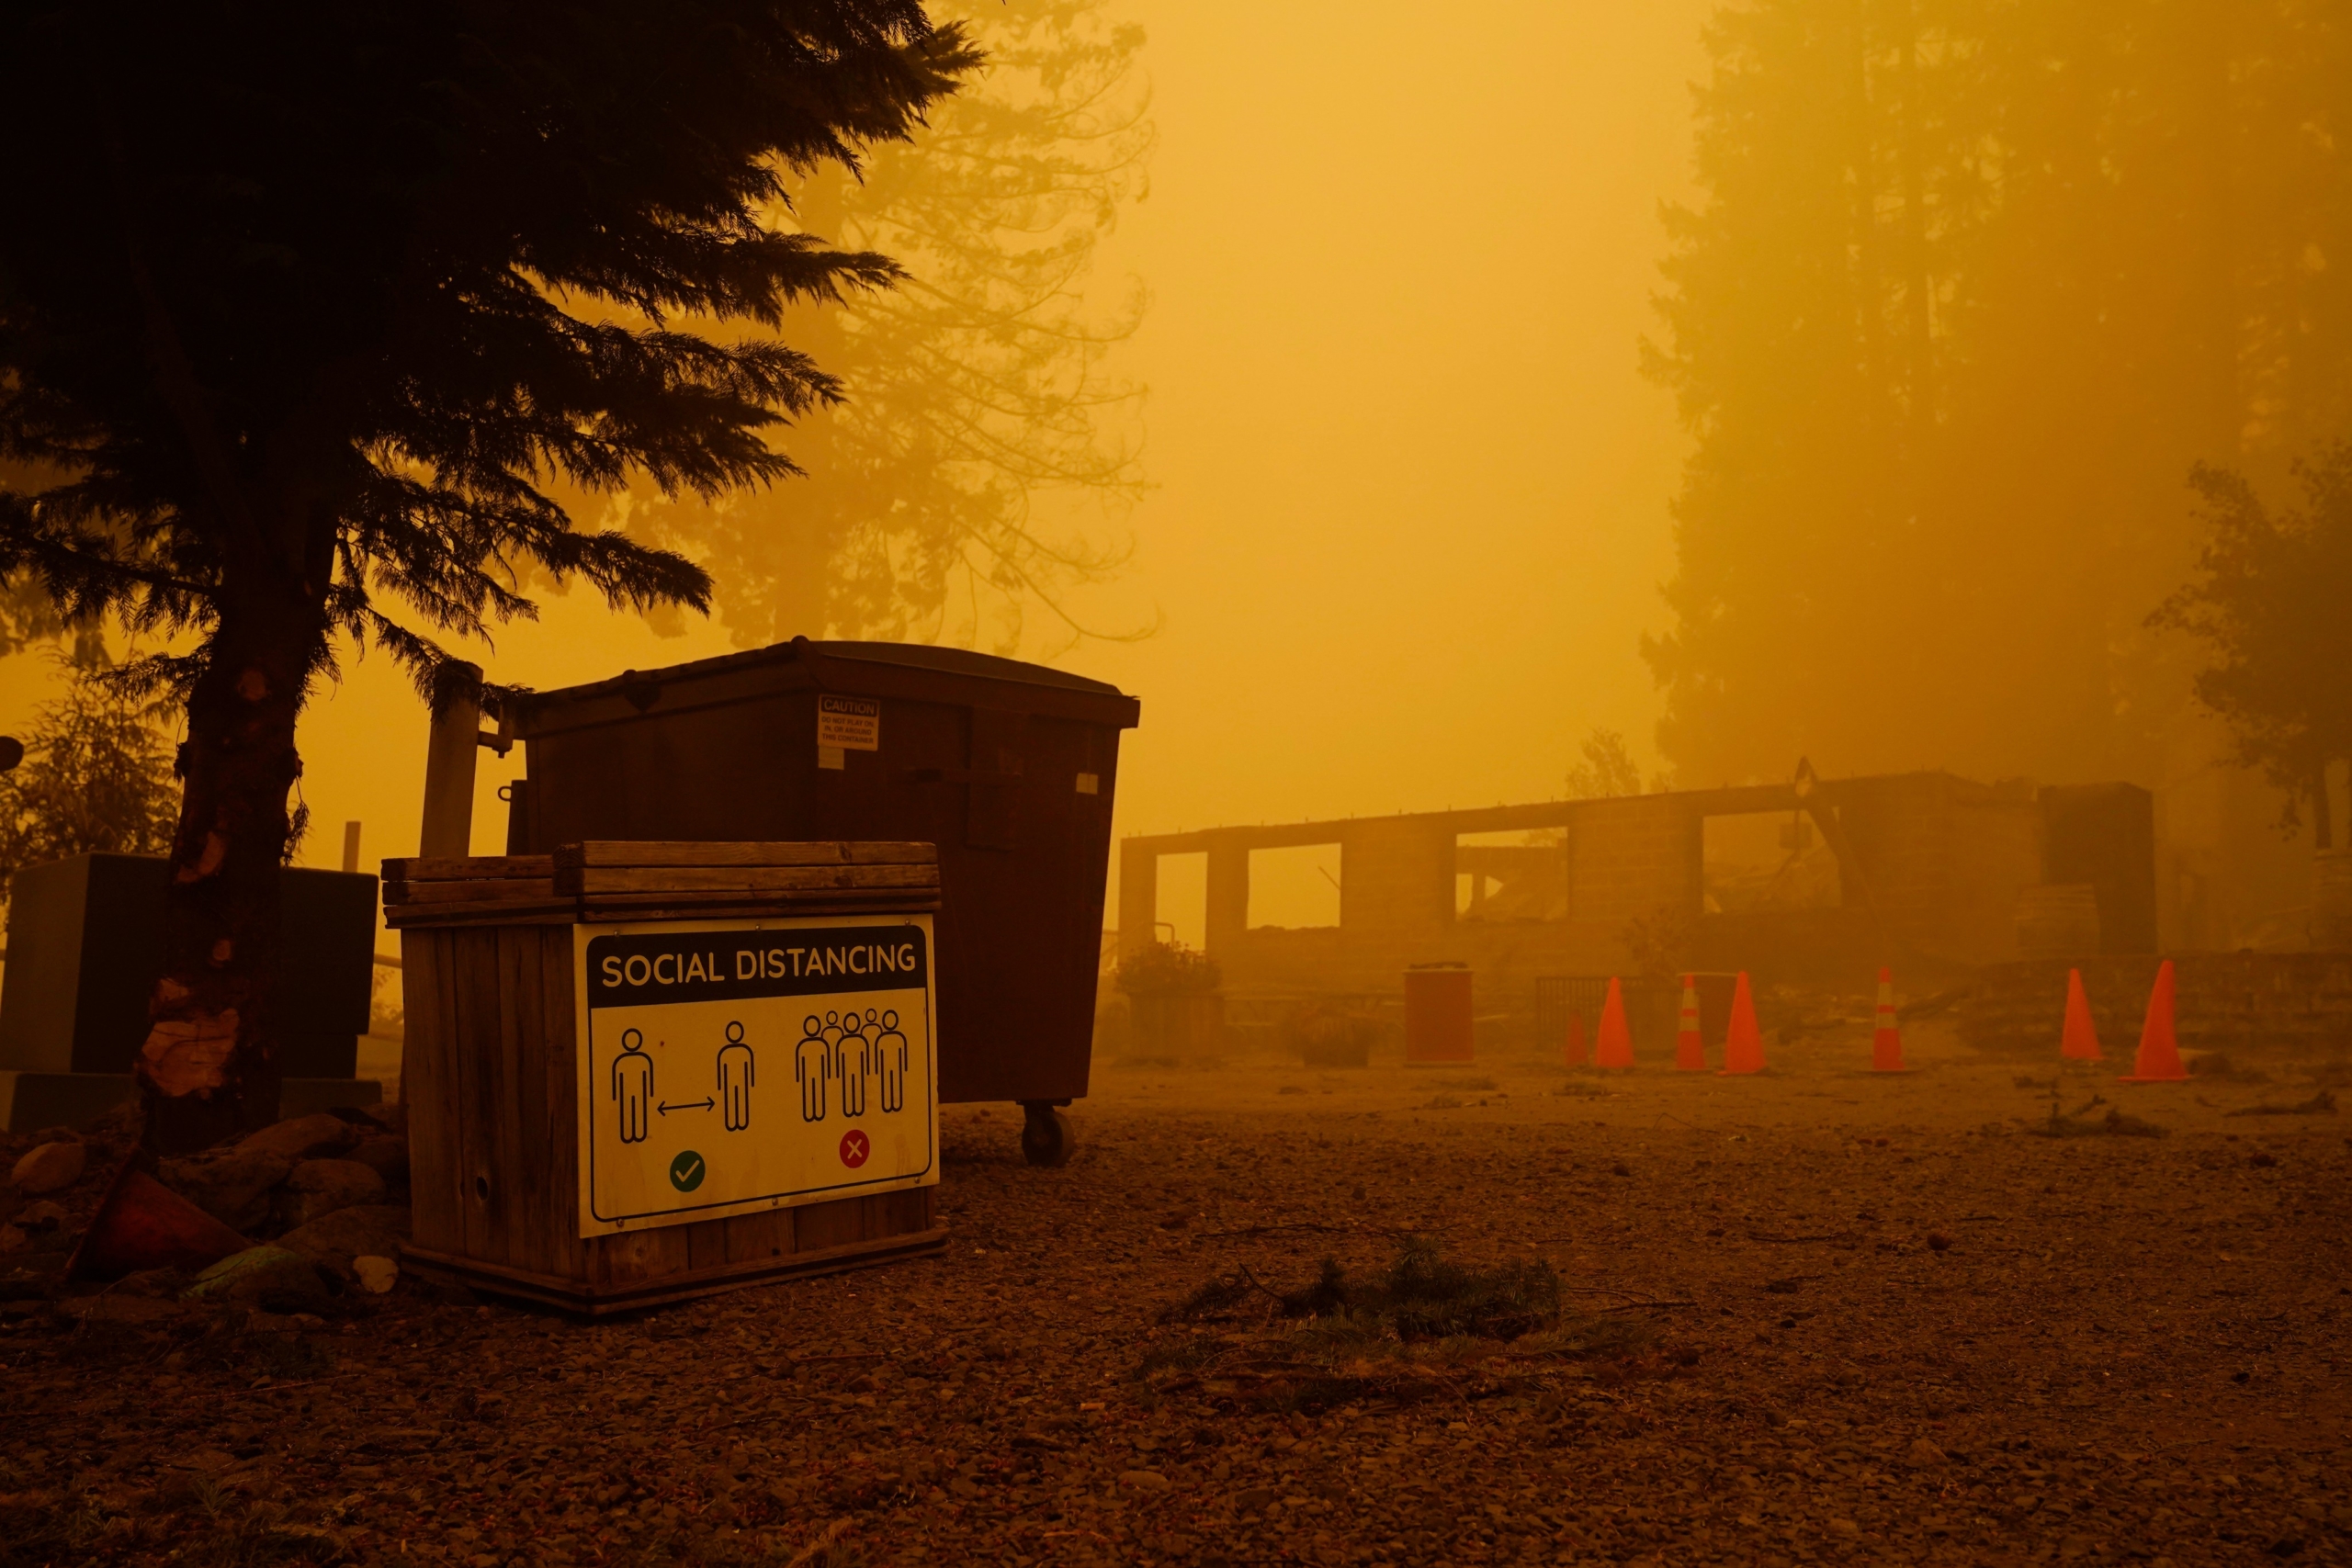 Winds a Worry as Death Toll Reaches 35 From West Coast Fires